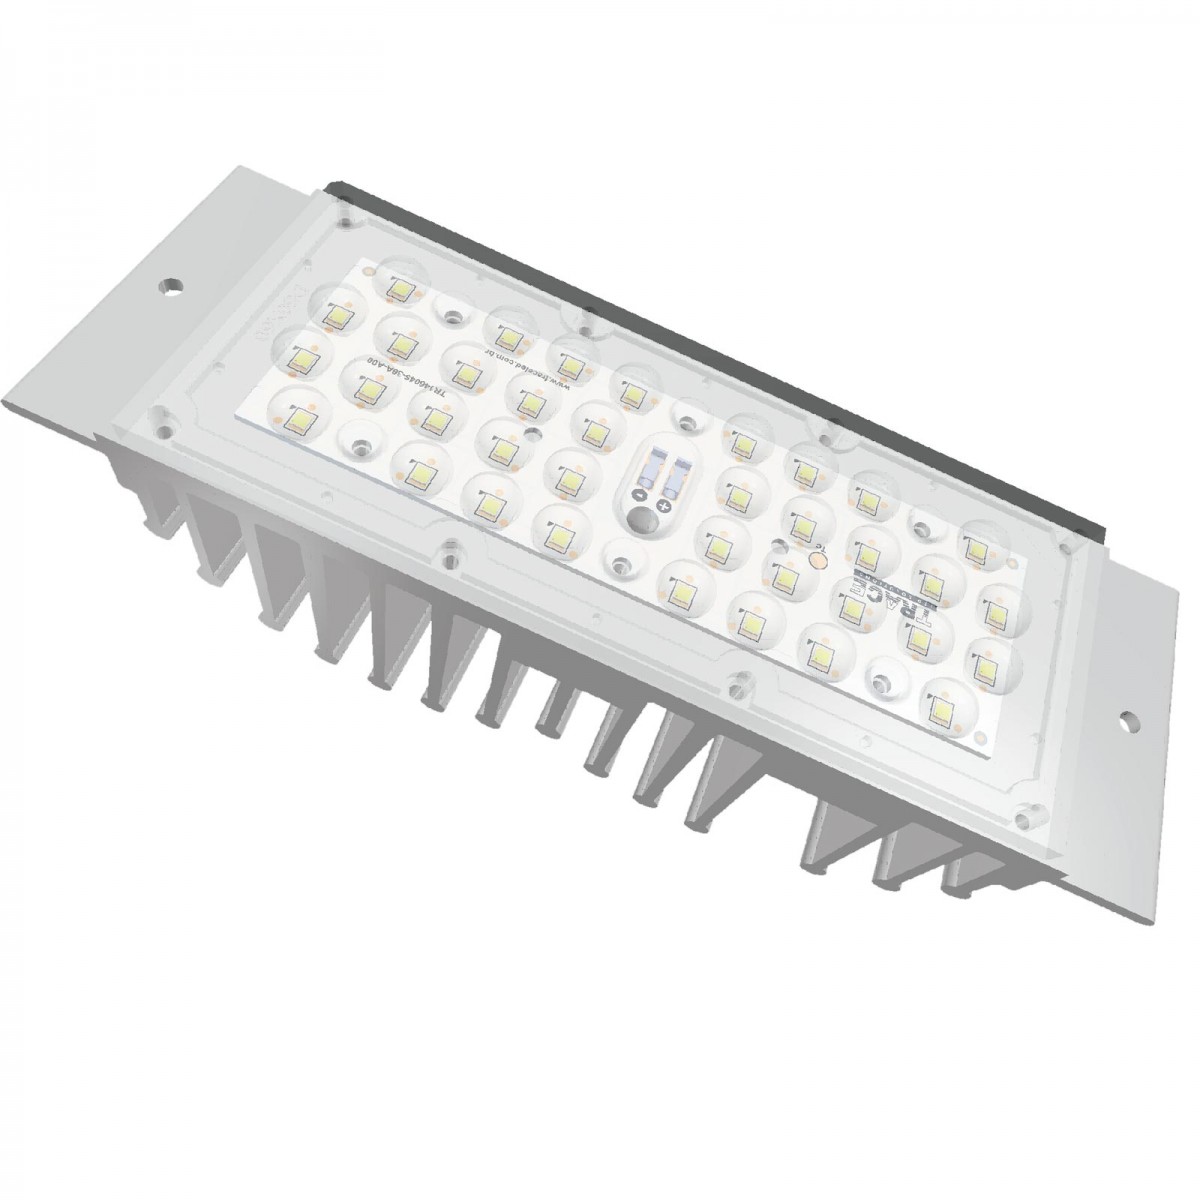 Trace LED Solutions